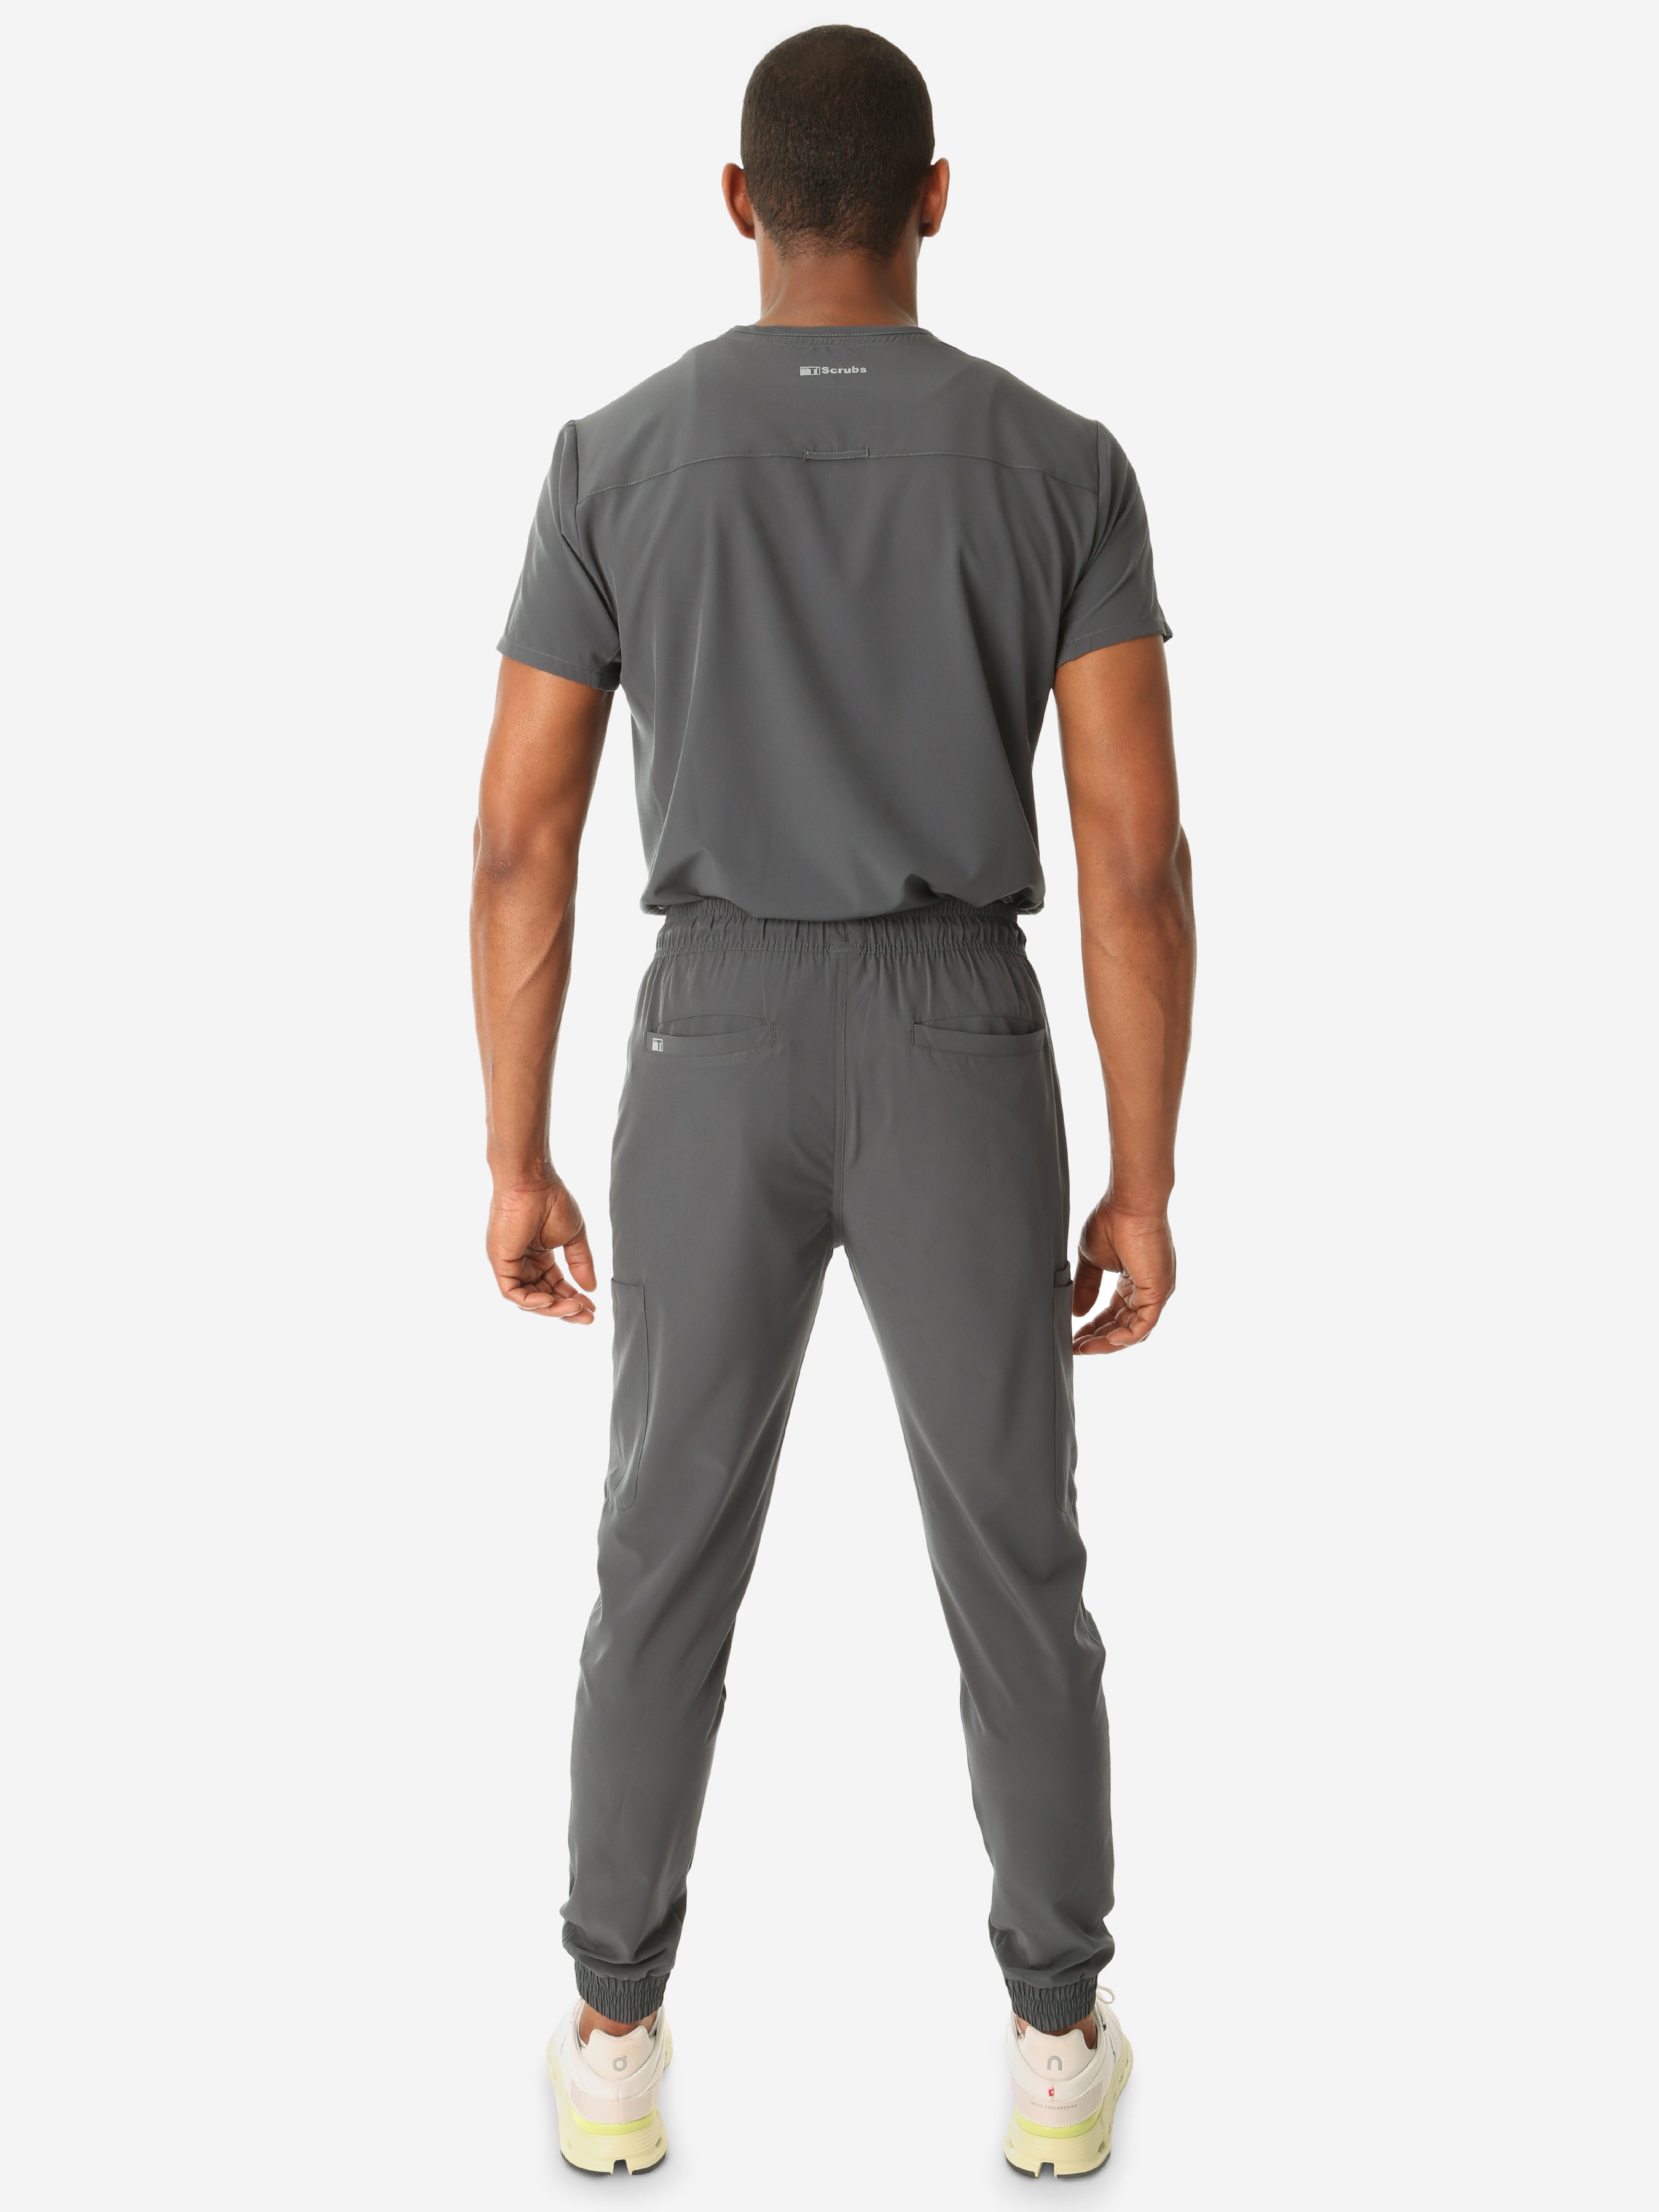 TiScrubs Stretch Charcoal Gray Men&#39;s Jogger Scrub Pants and Double Pocket Top Tucked Full Body Back